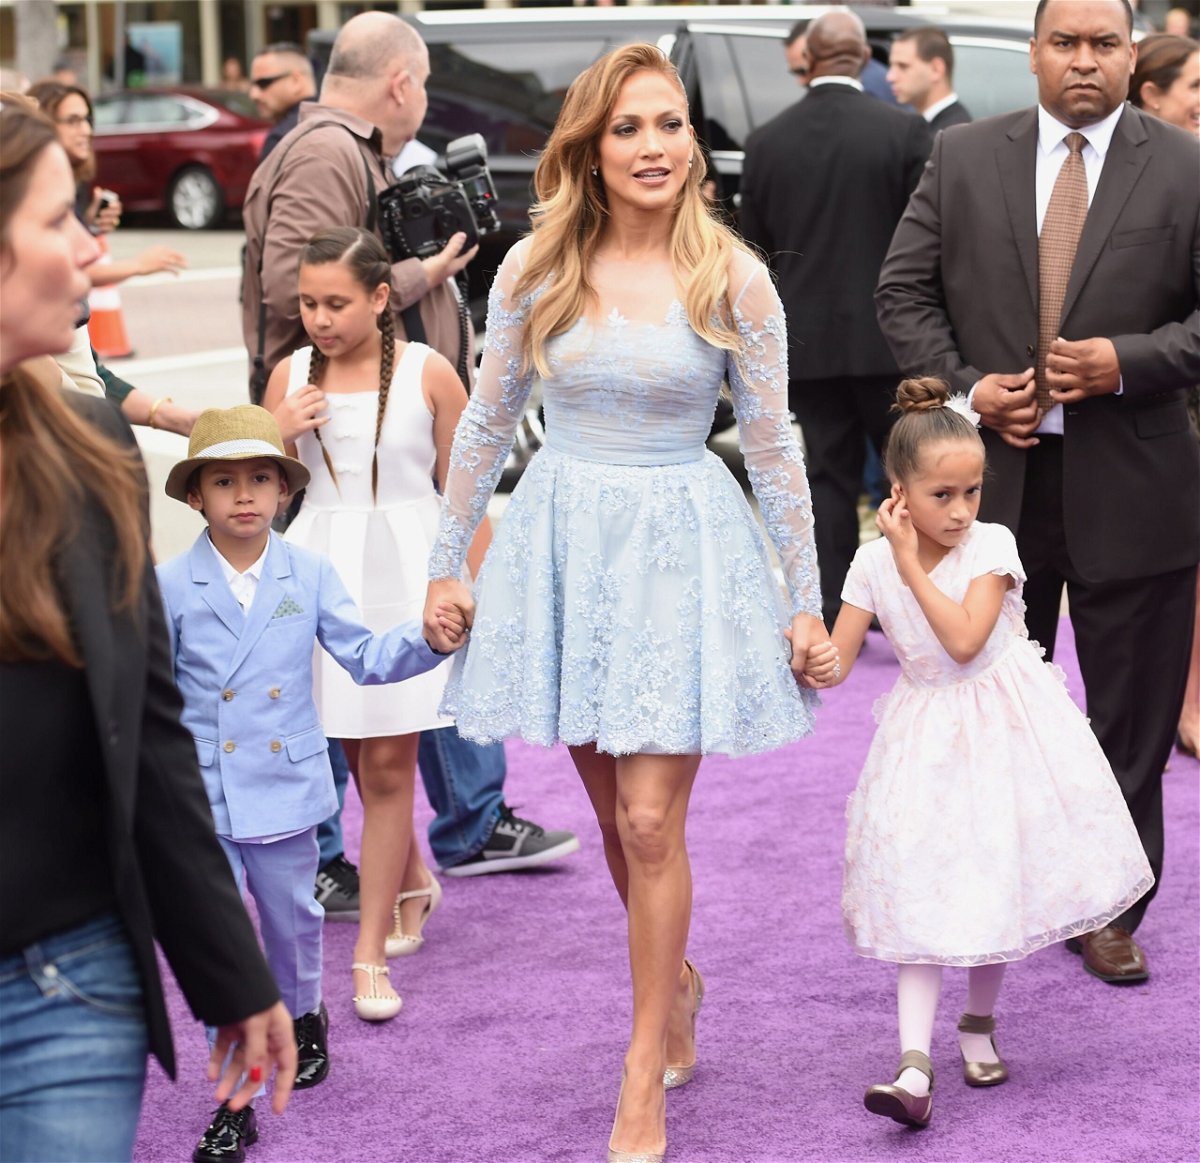 <i>Jason Merritt/Getty Images</i><br/>Jennifer Lopez (C) wishes she could protect her kids from having famous parent. The actress is pictured here with son Maximilian David Muniz (L) and daughter Emme Maribel Muniz (R) in 2015